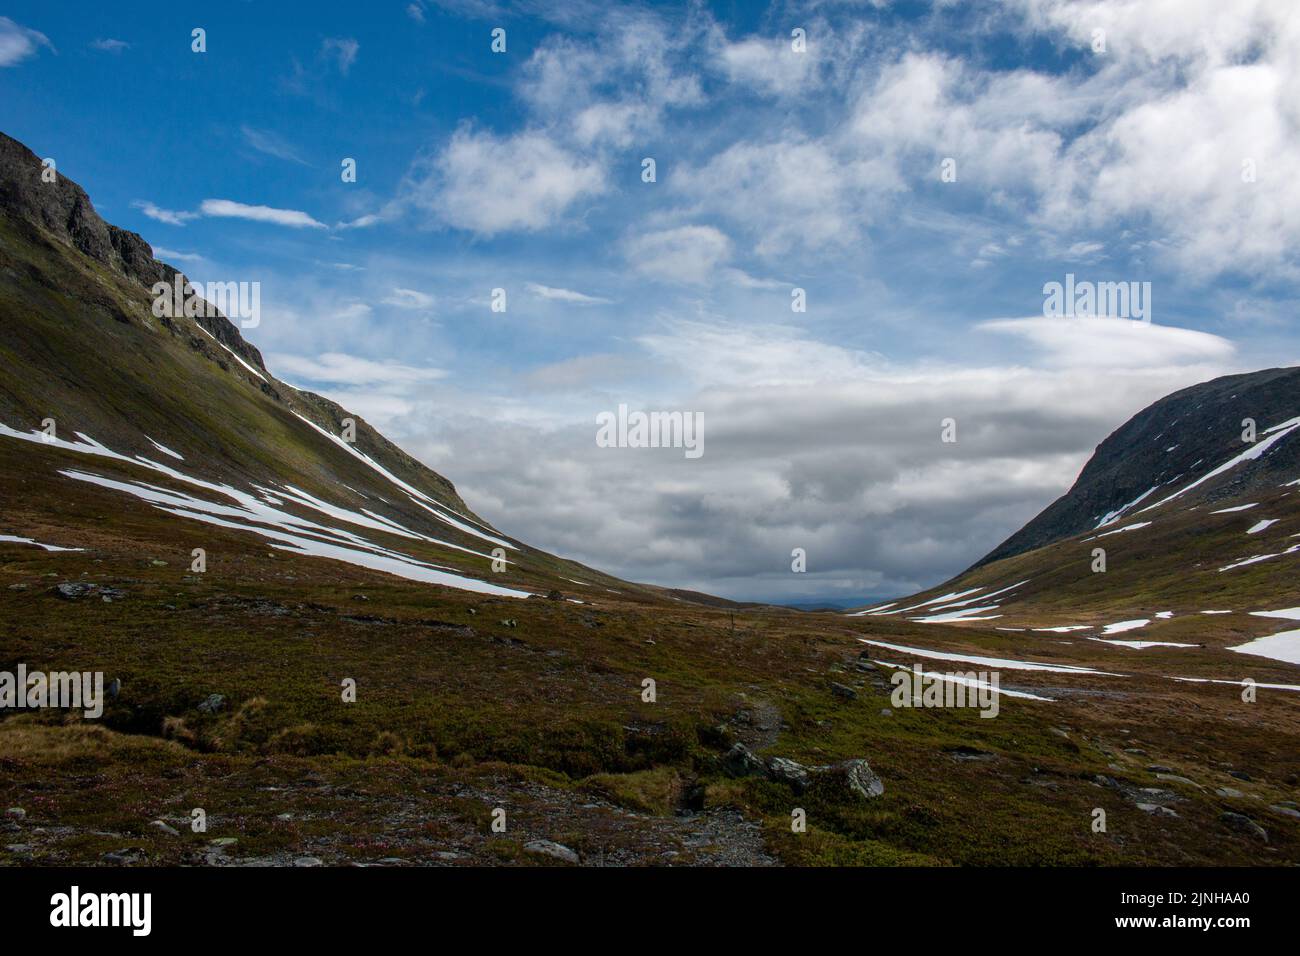 A hiking trail between Norwegian Nedalshytta and Swedish Sylarna mountain stations folowing a valley, early July, Jamtland, Sweden Stock Photo